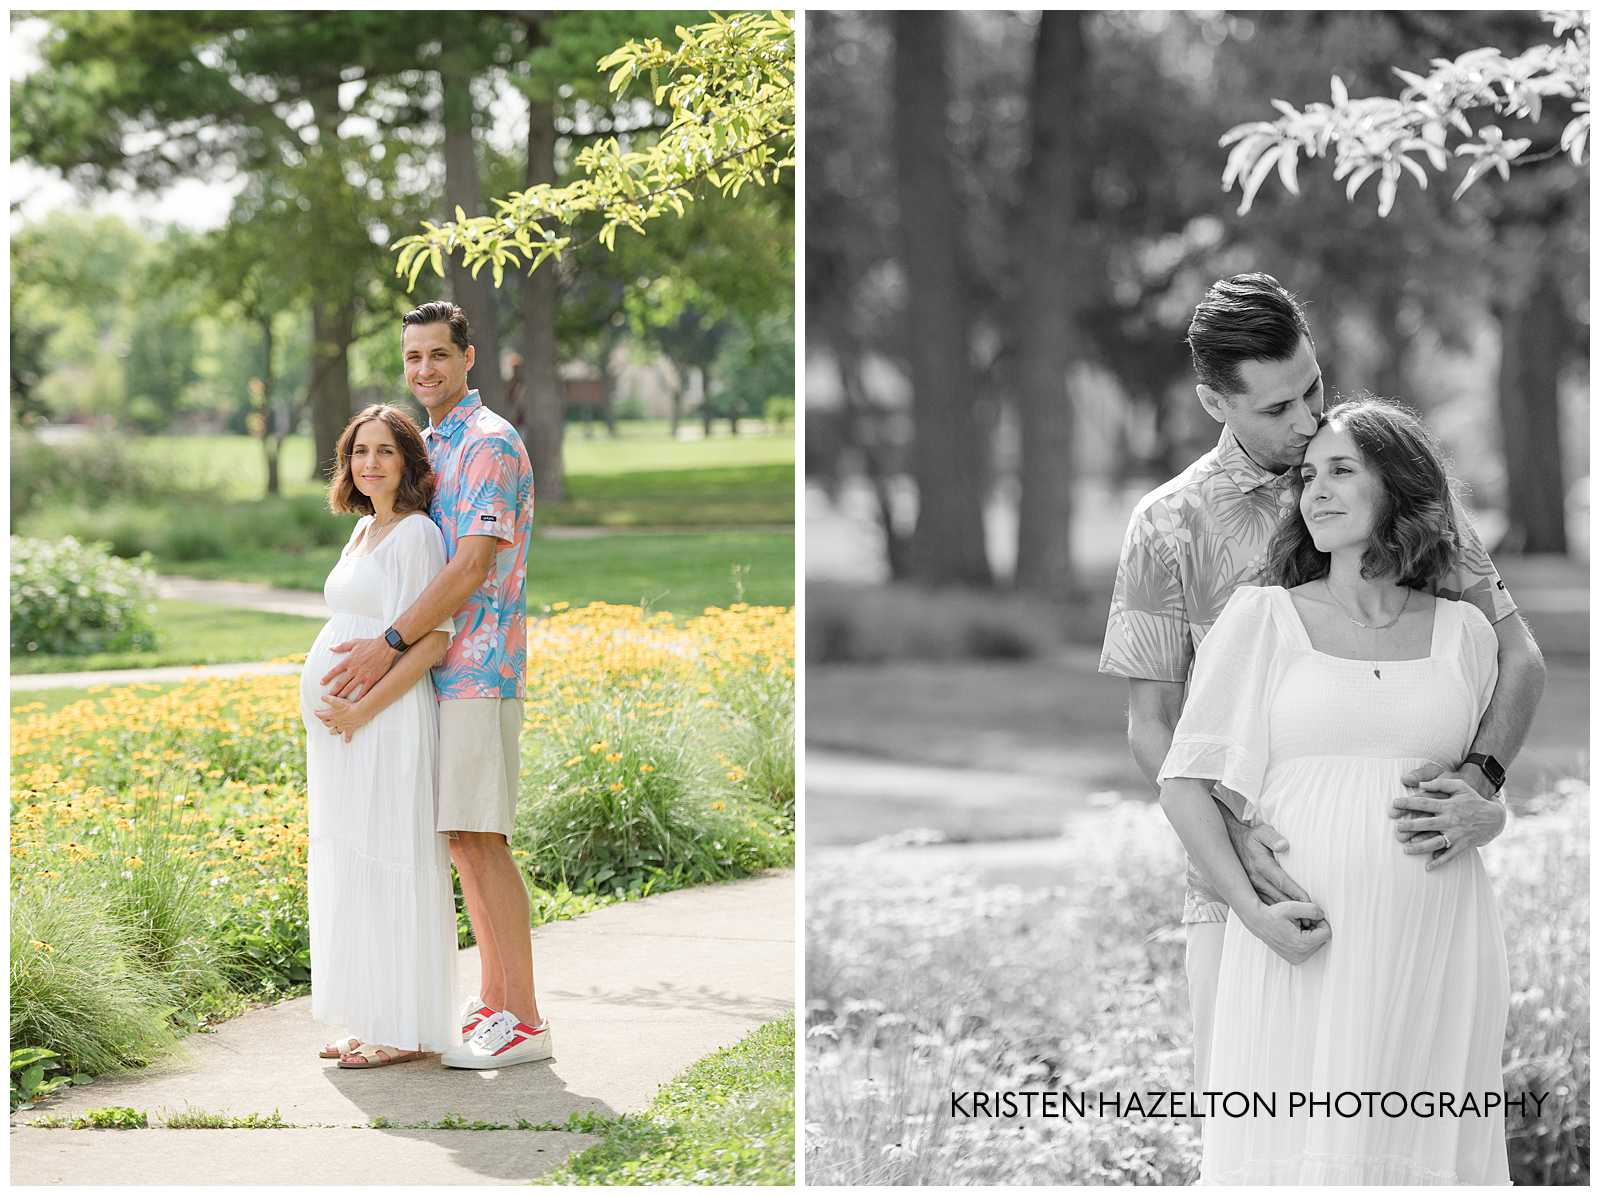 Maternity photos of a husband and wife